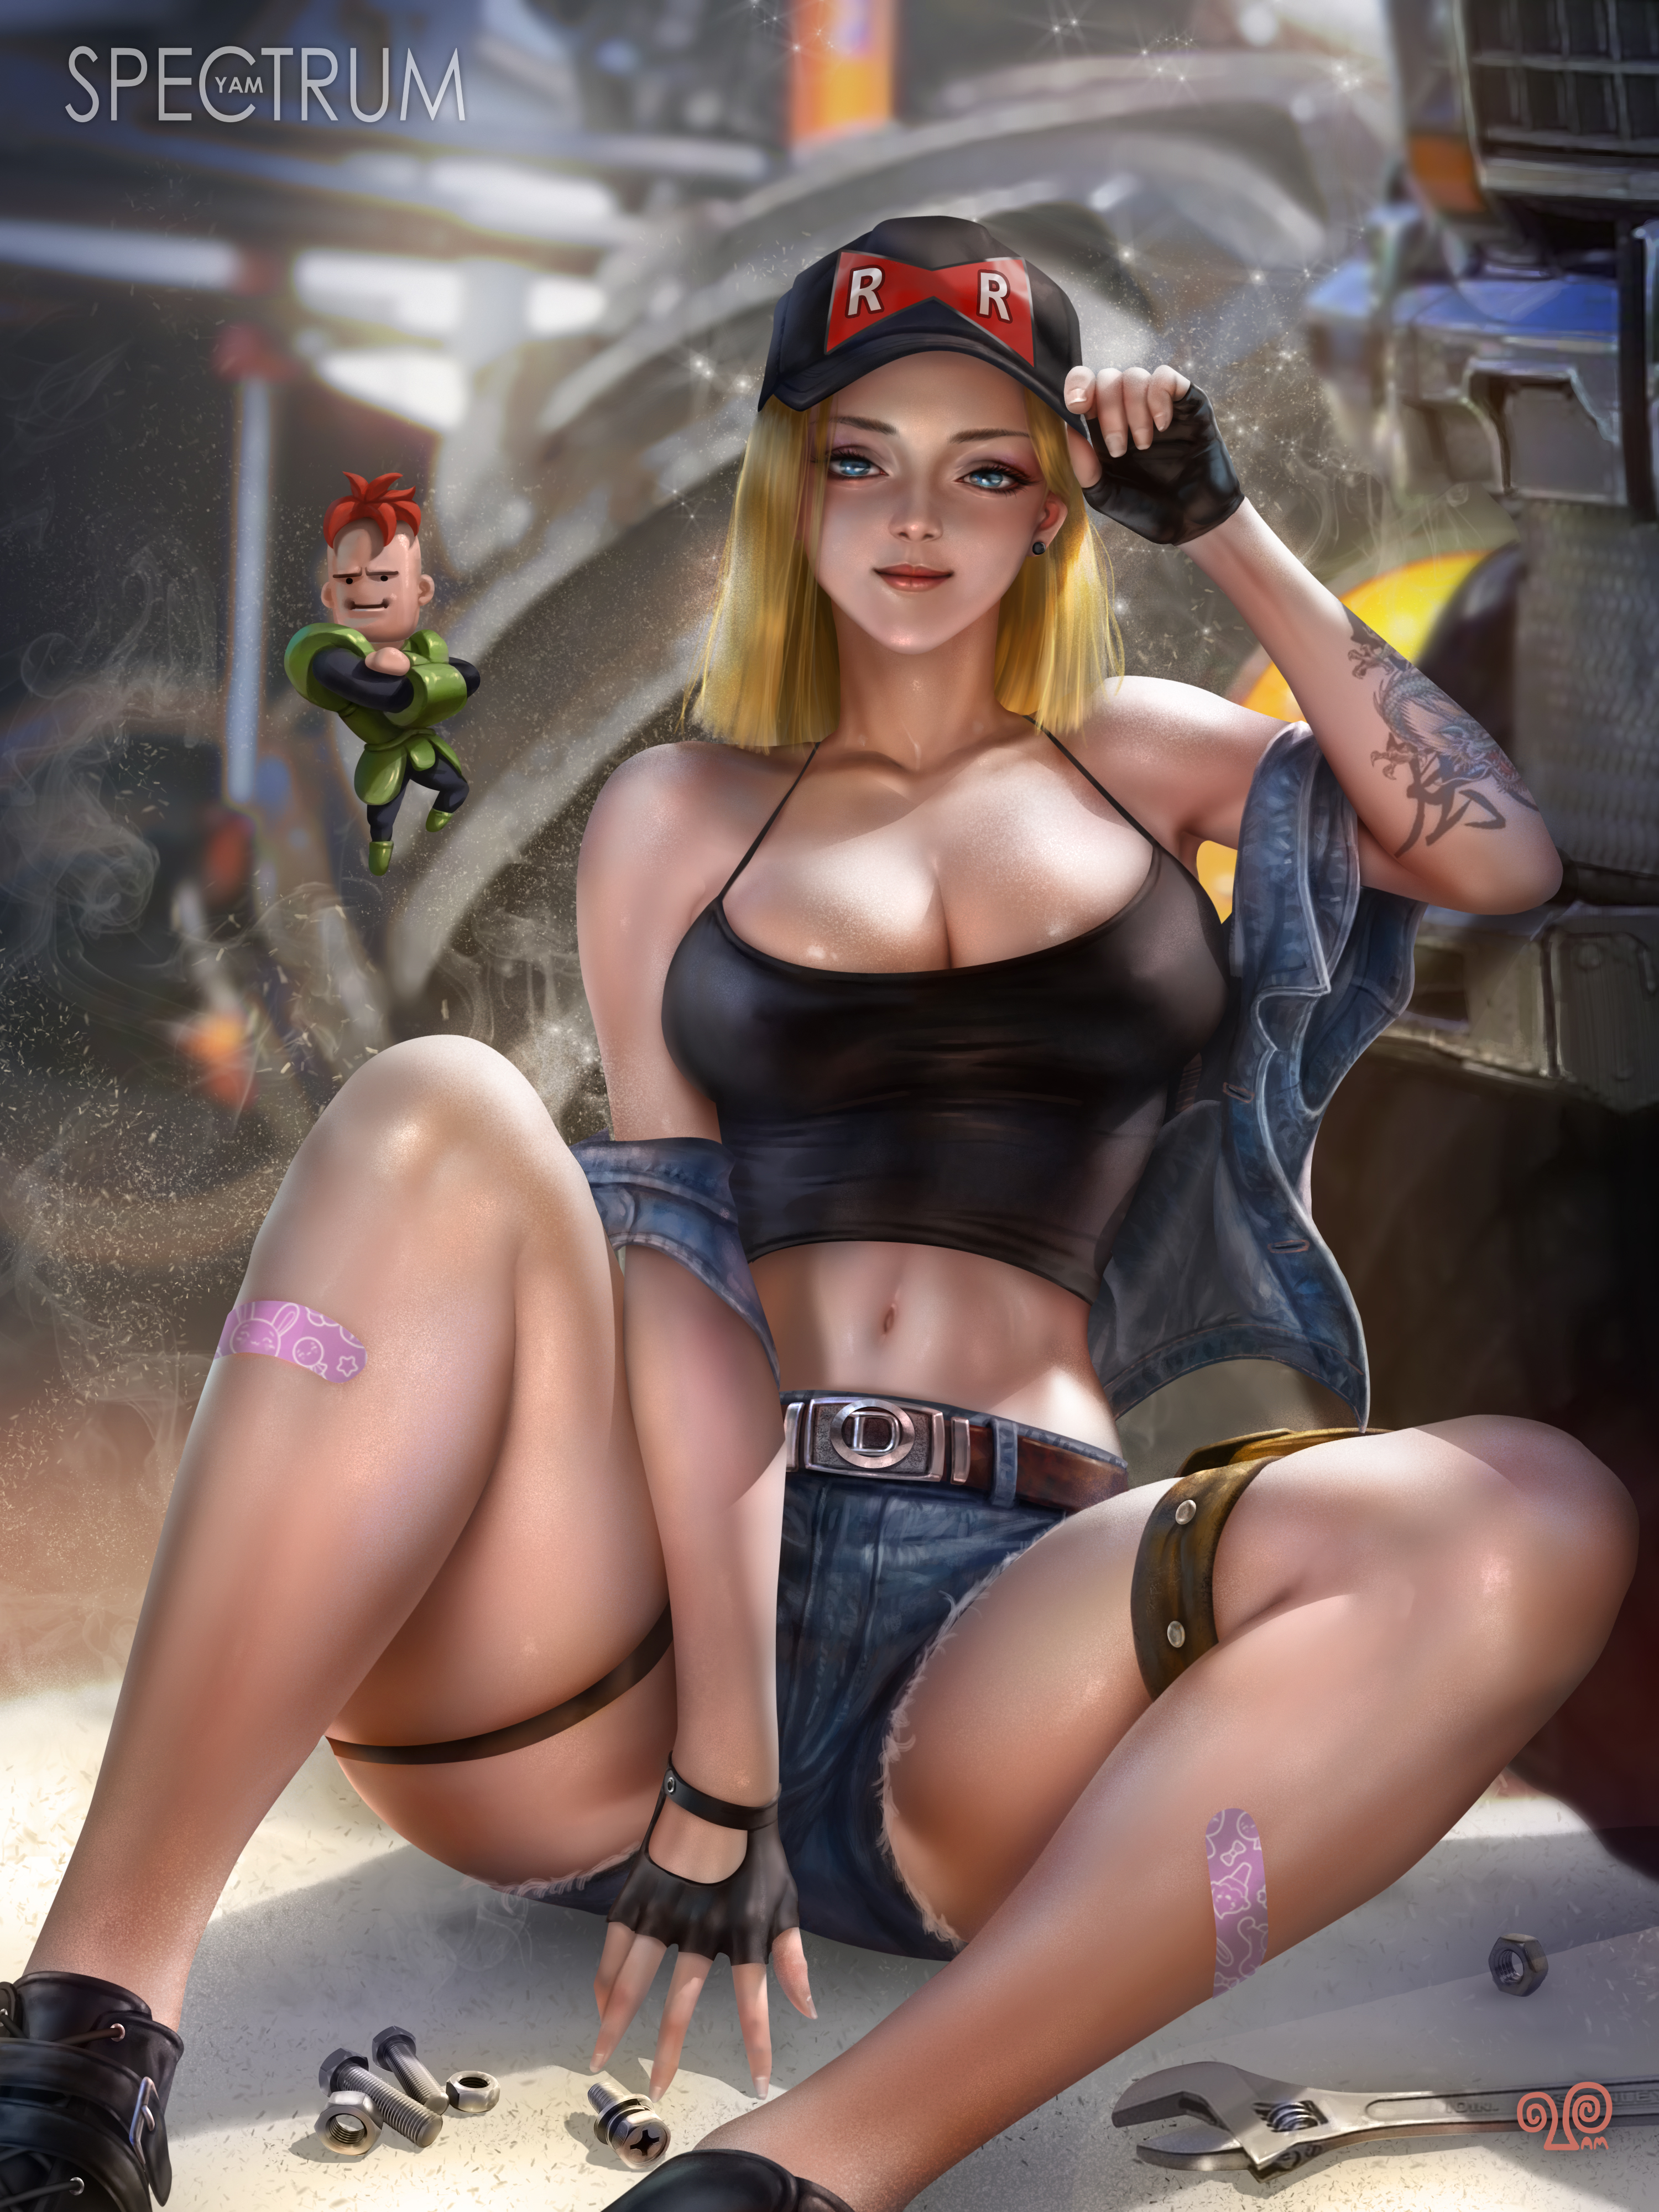 Anime 3000x4000 Android 18 Dragon Ball Z anime anime girls blonde 2D artwork drawing fan art Mansik Yang black top denim jean shorts cleavage band-aid big boobs portrait display hat tattoo Android 16 chibi